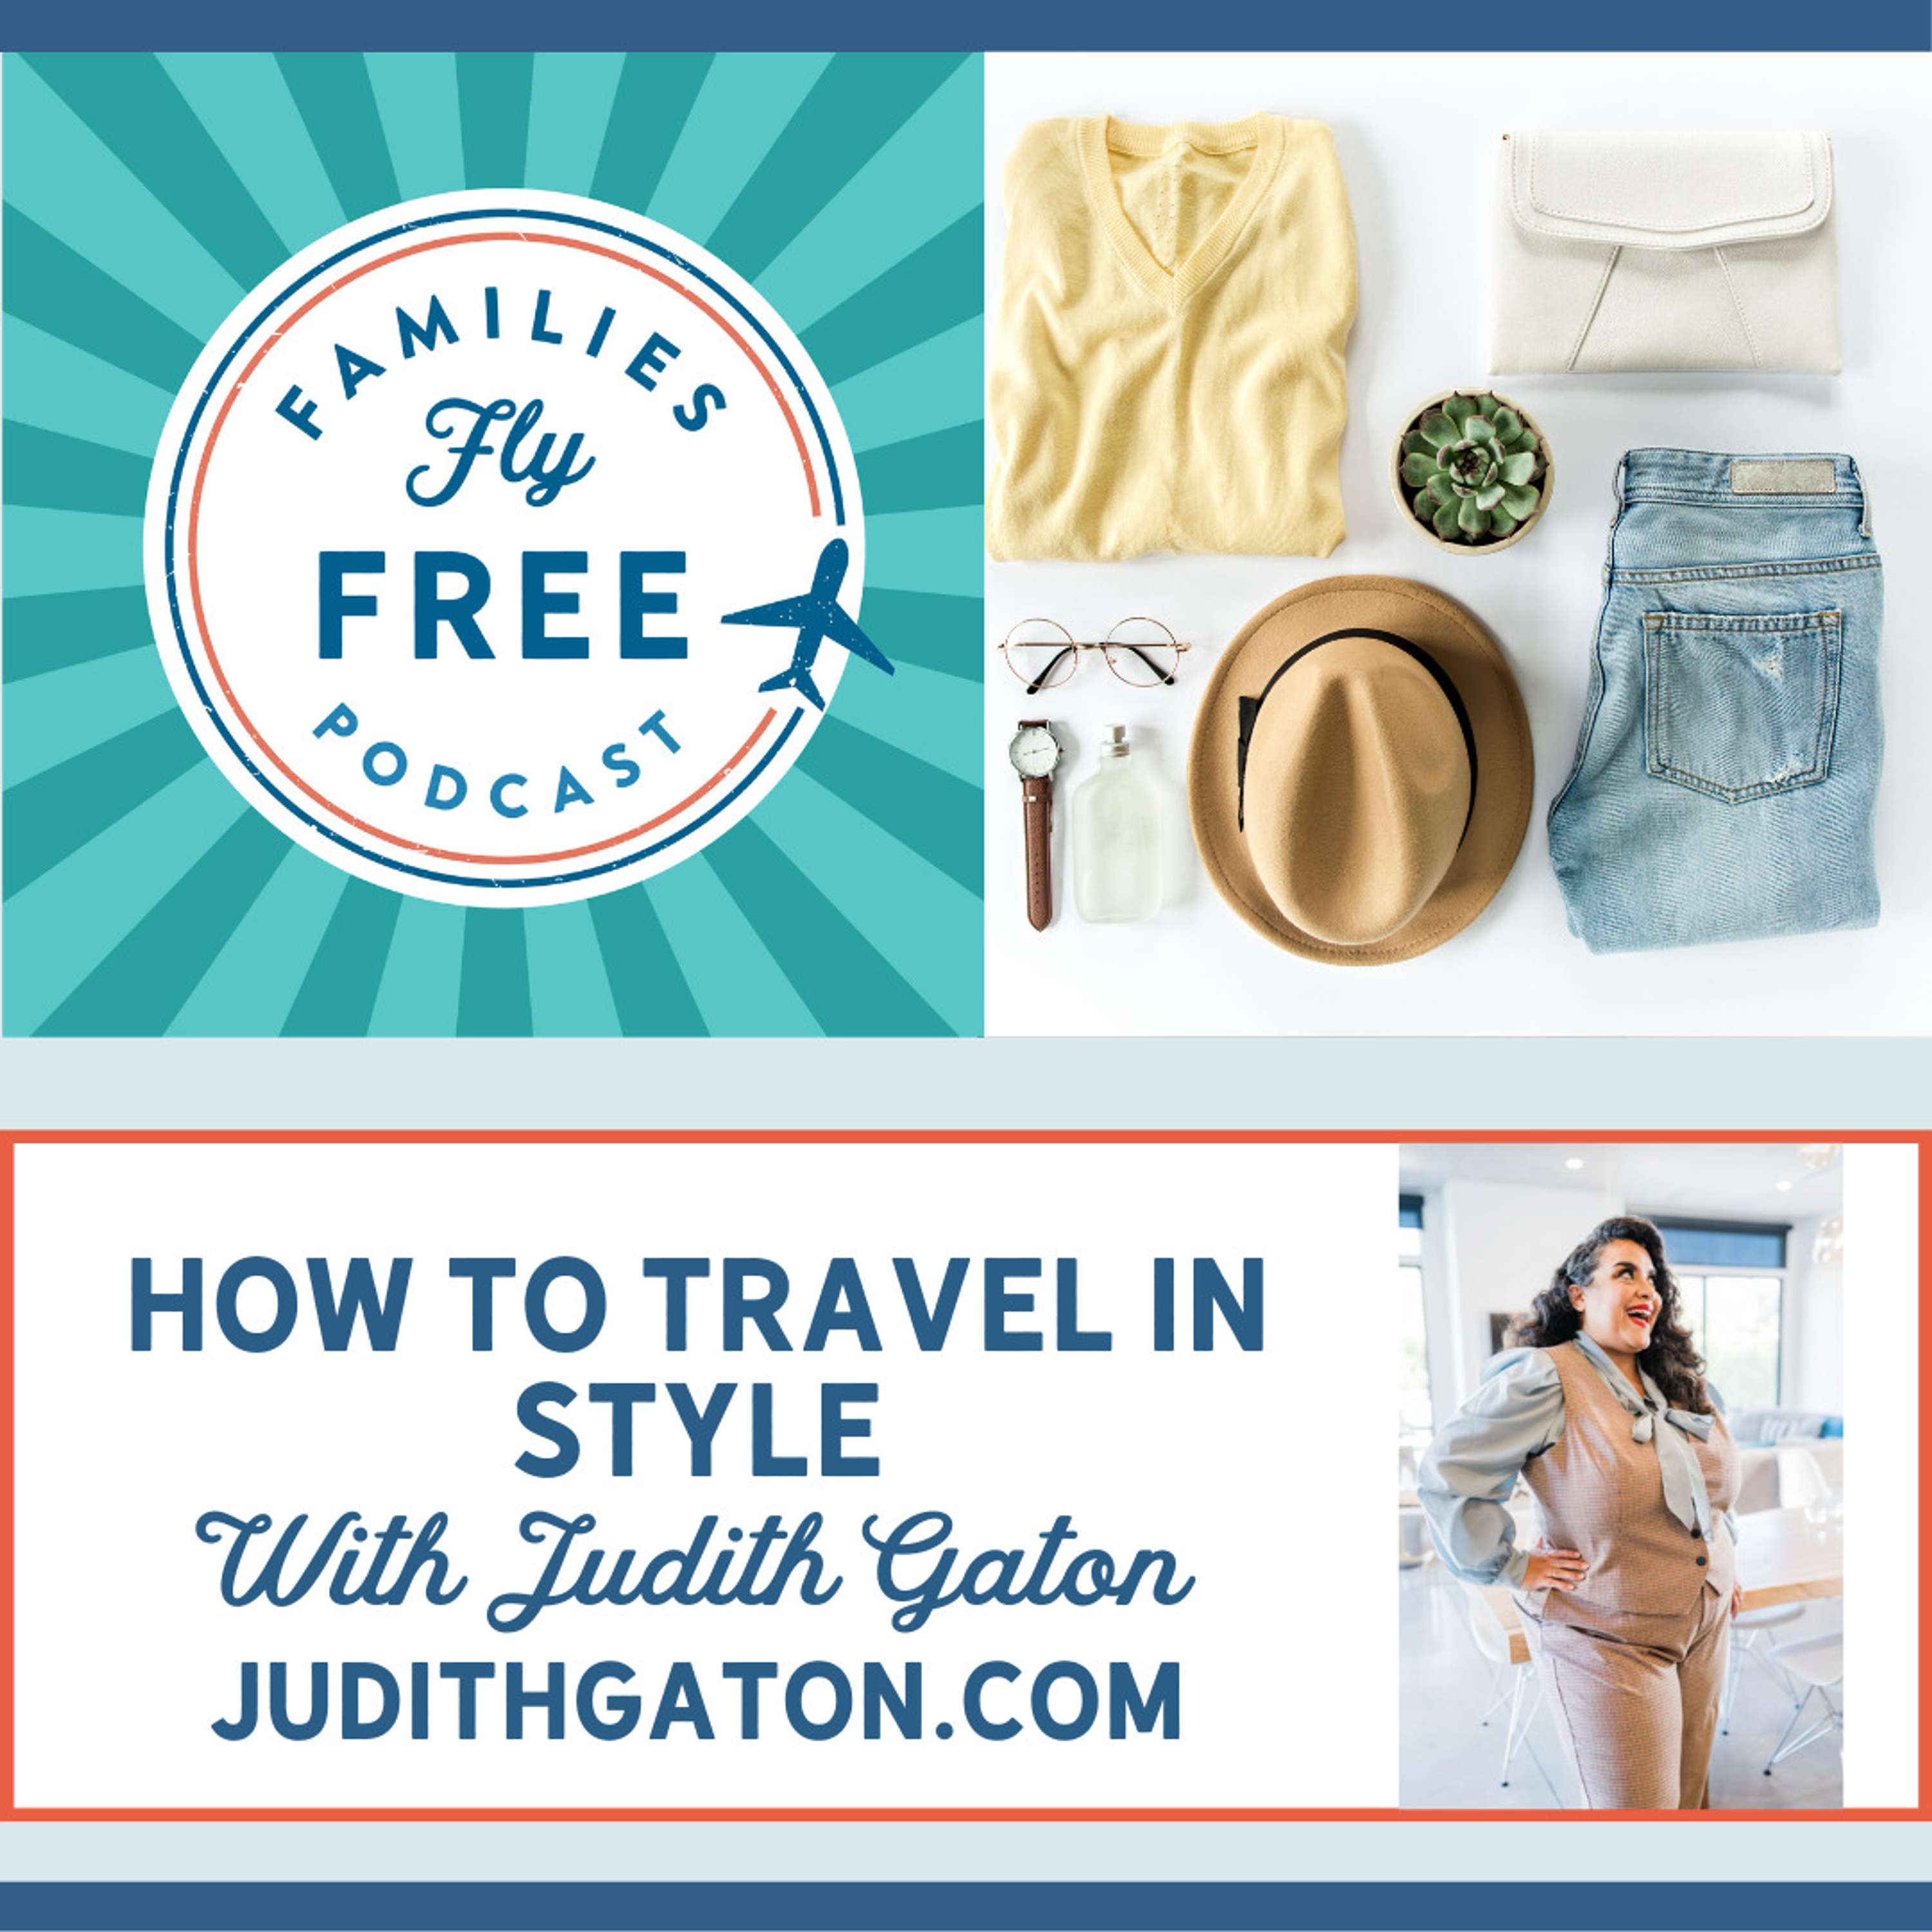 78 | Looking Great While Traveling: Travel Comfort & Style with Judith Gaton